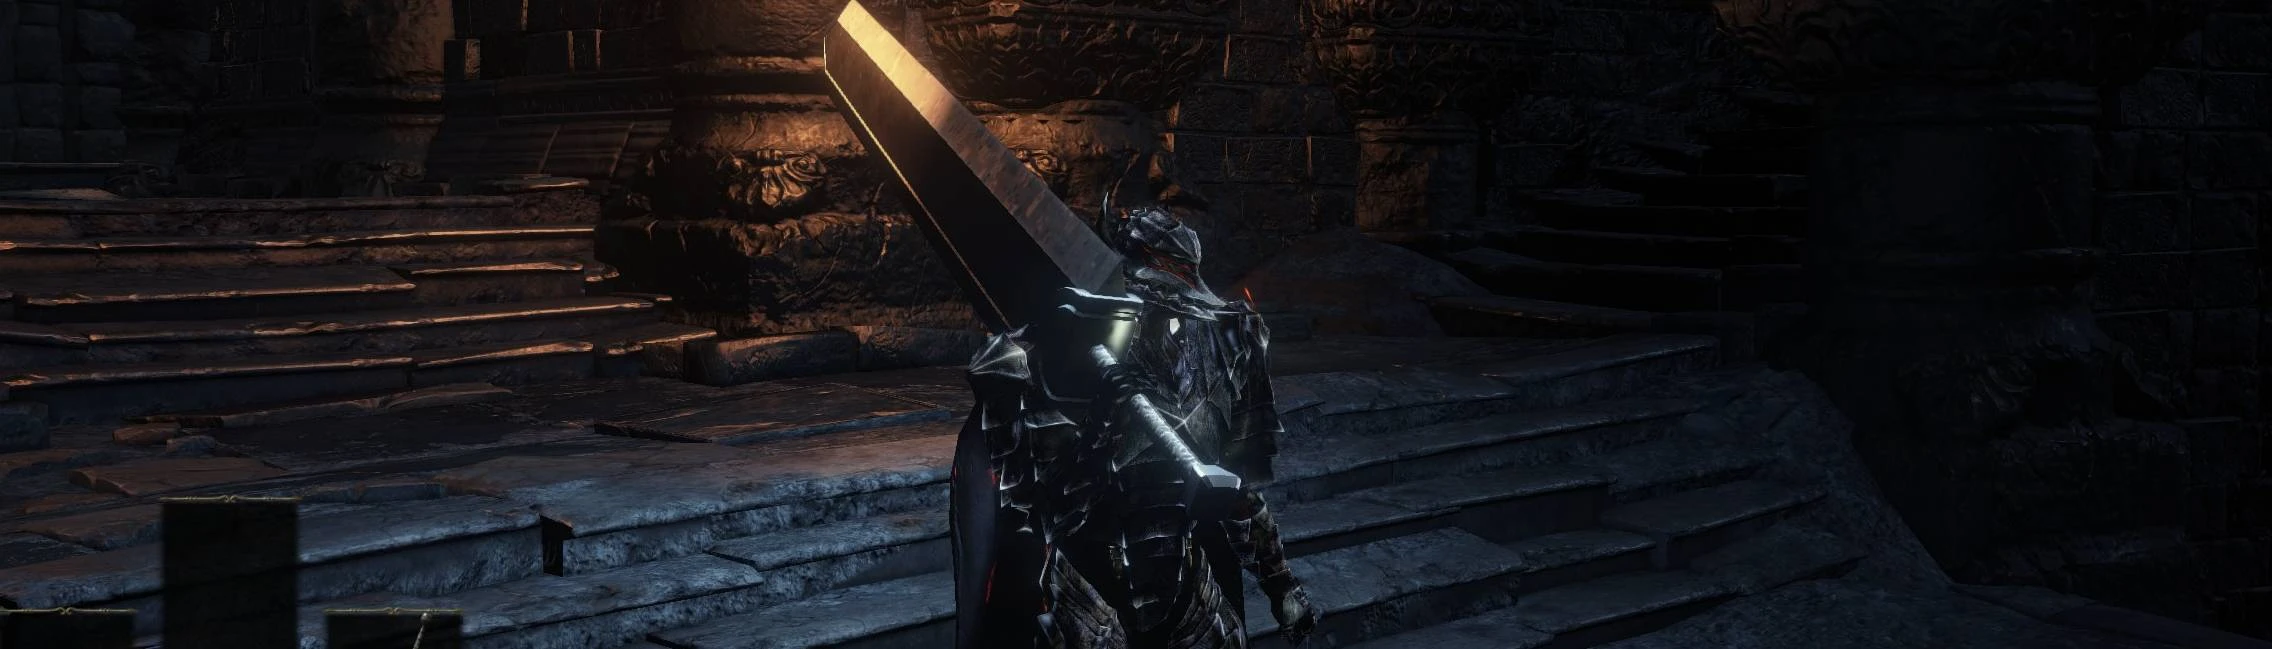 Found Guts's sword in Dark Souls 3 along with messages left by